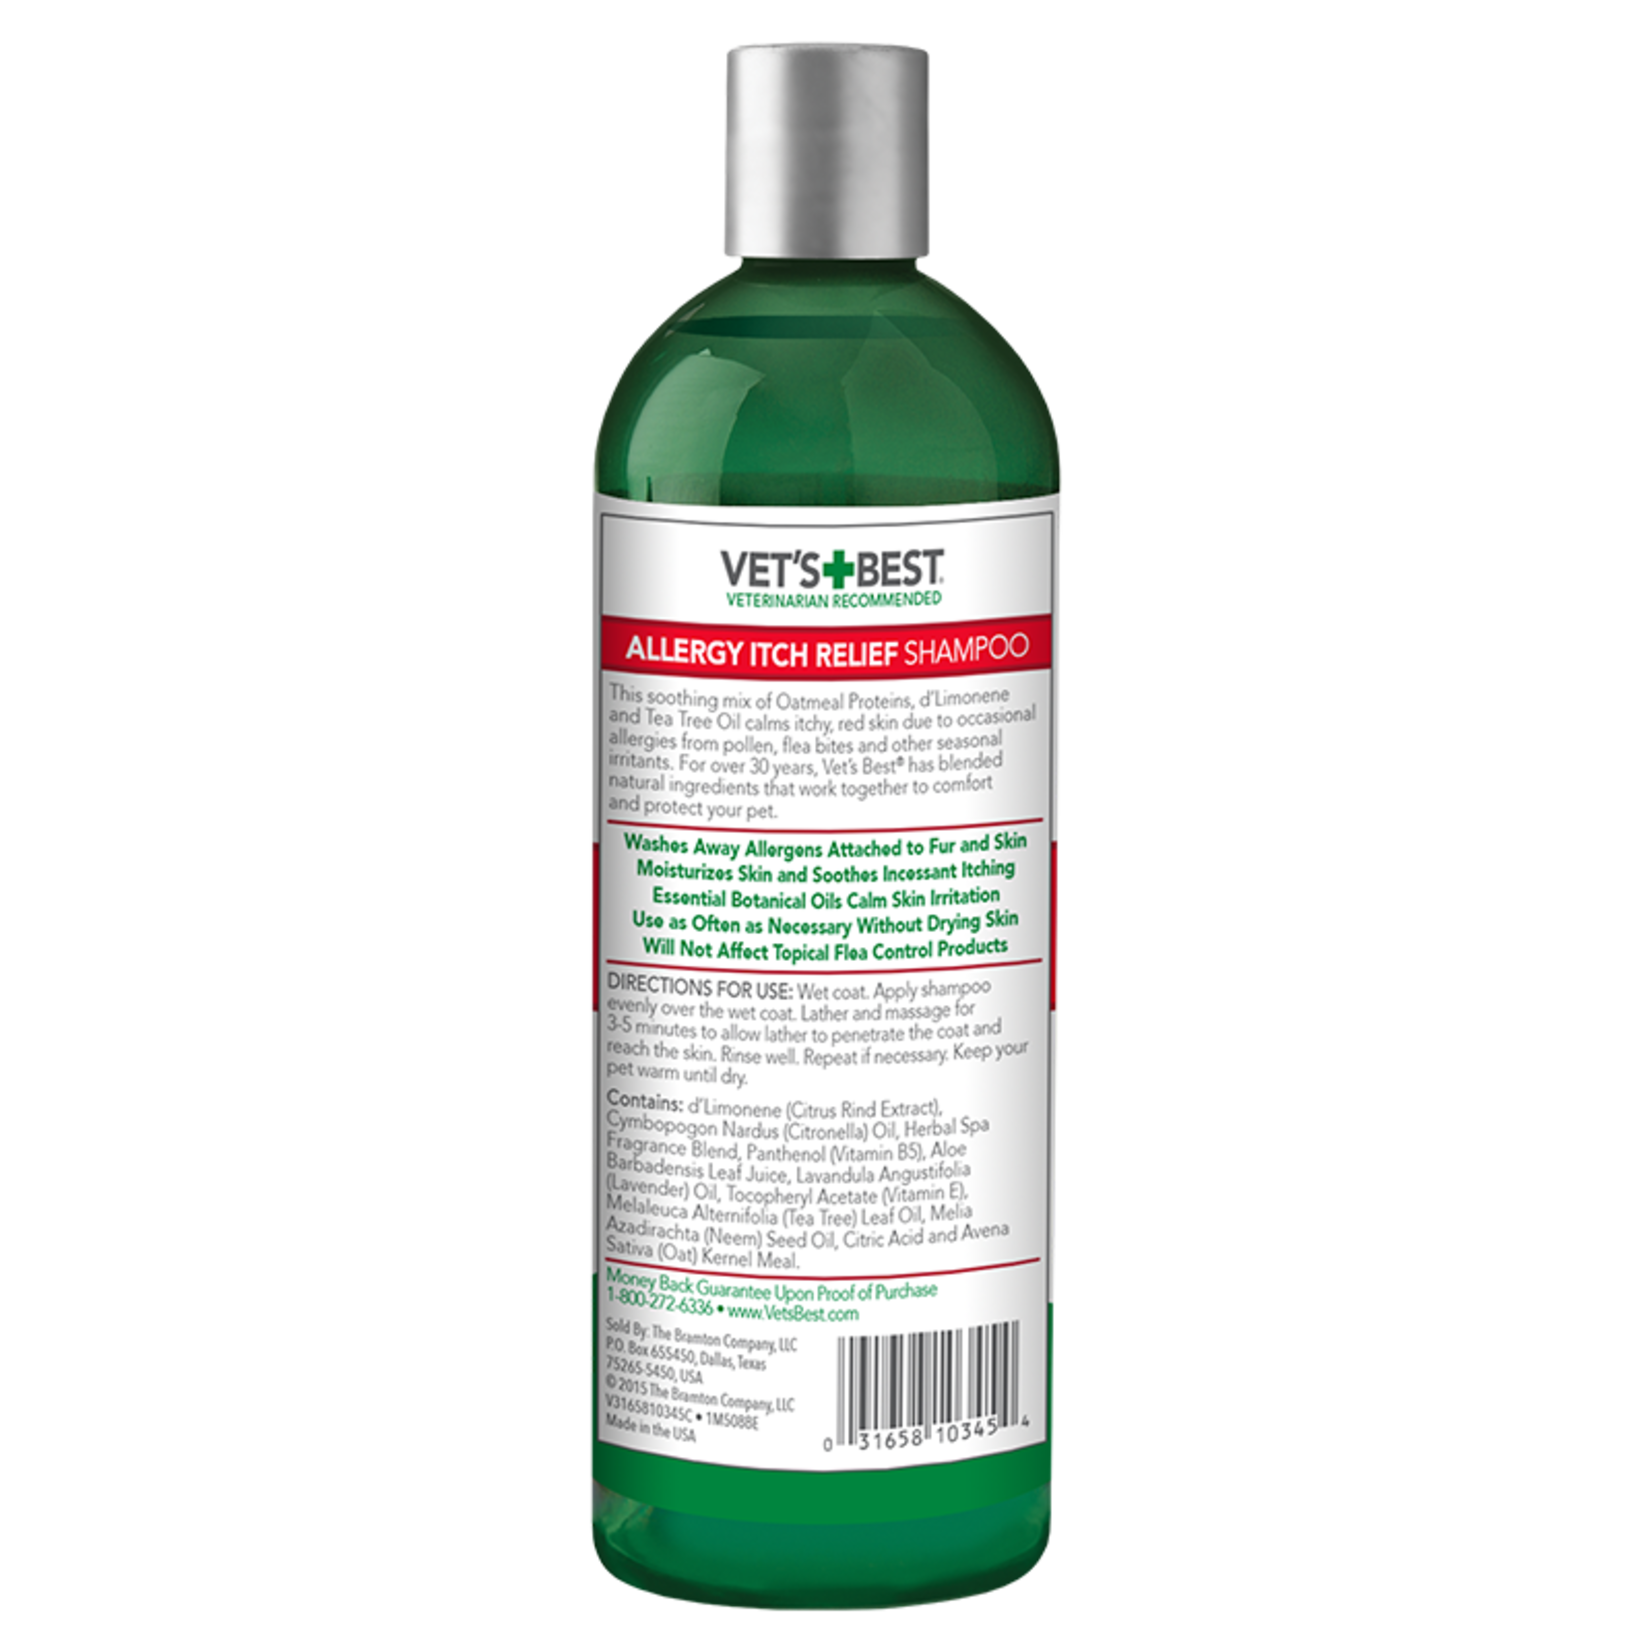 Vet's Best Vets Best: Allergy Itch Relief Shampoo 16oz